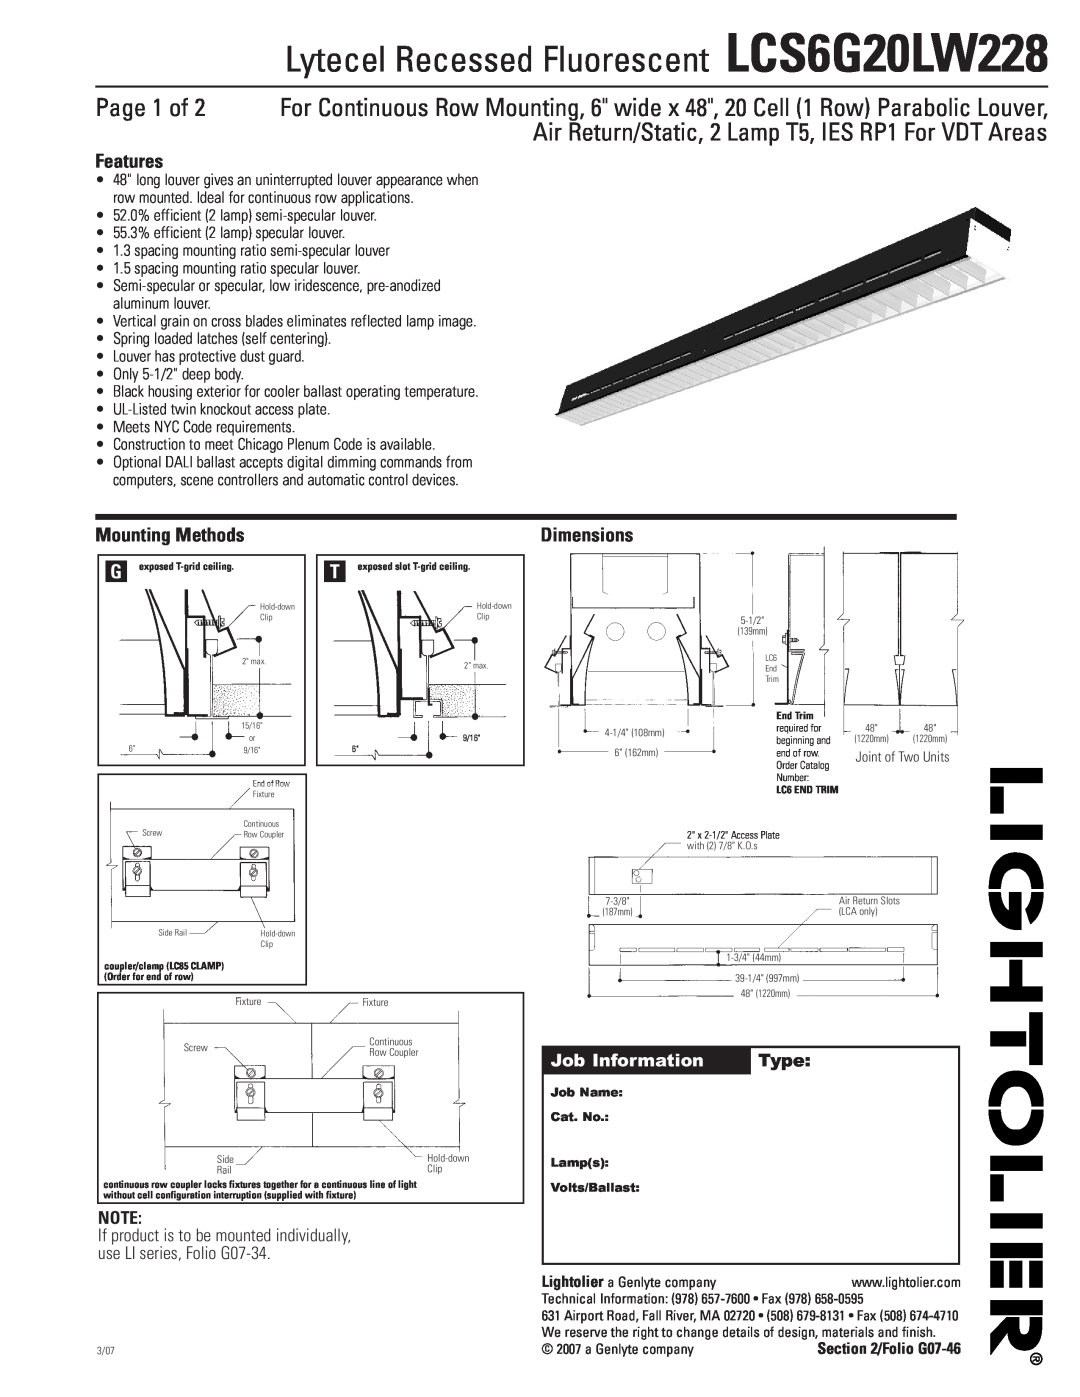 Lightolier dimensions Lytecel Recessed Fluorescent LCS6G20LW228, Features, Mounting Methods, Dimensions, Type 